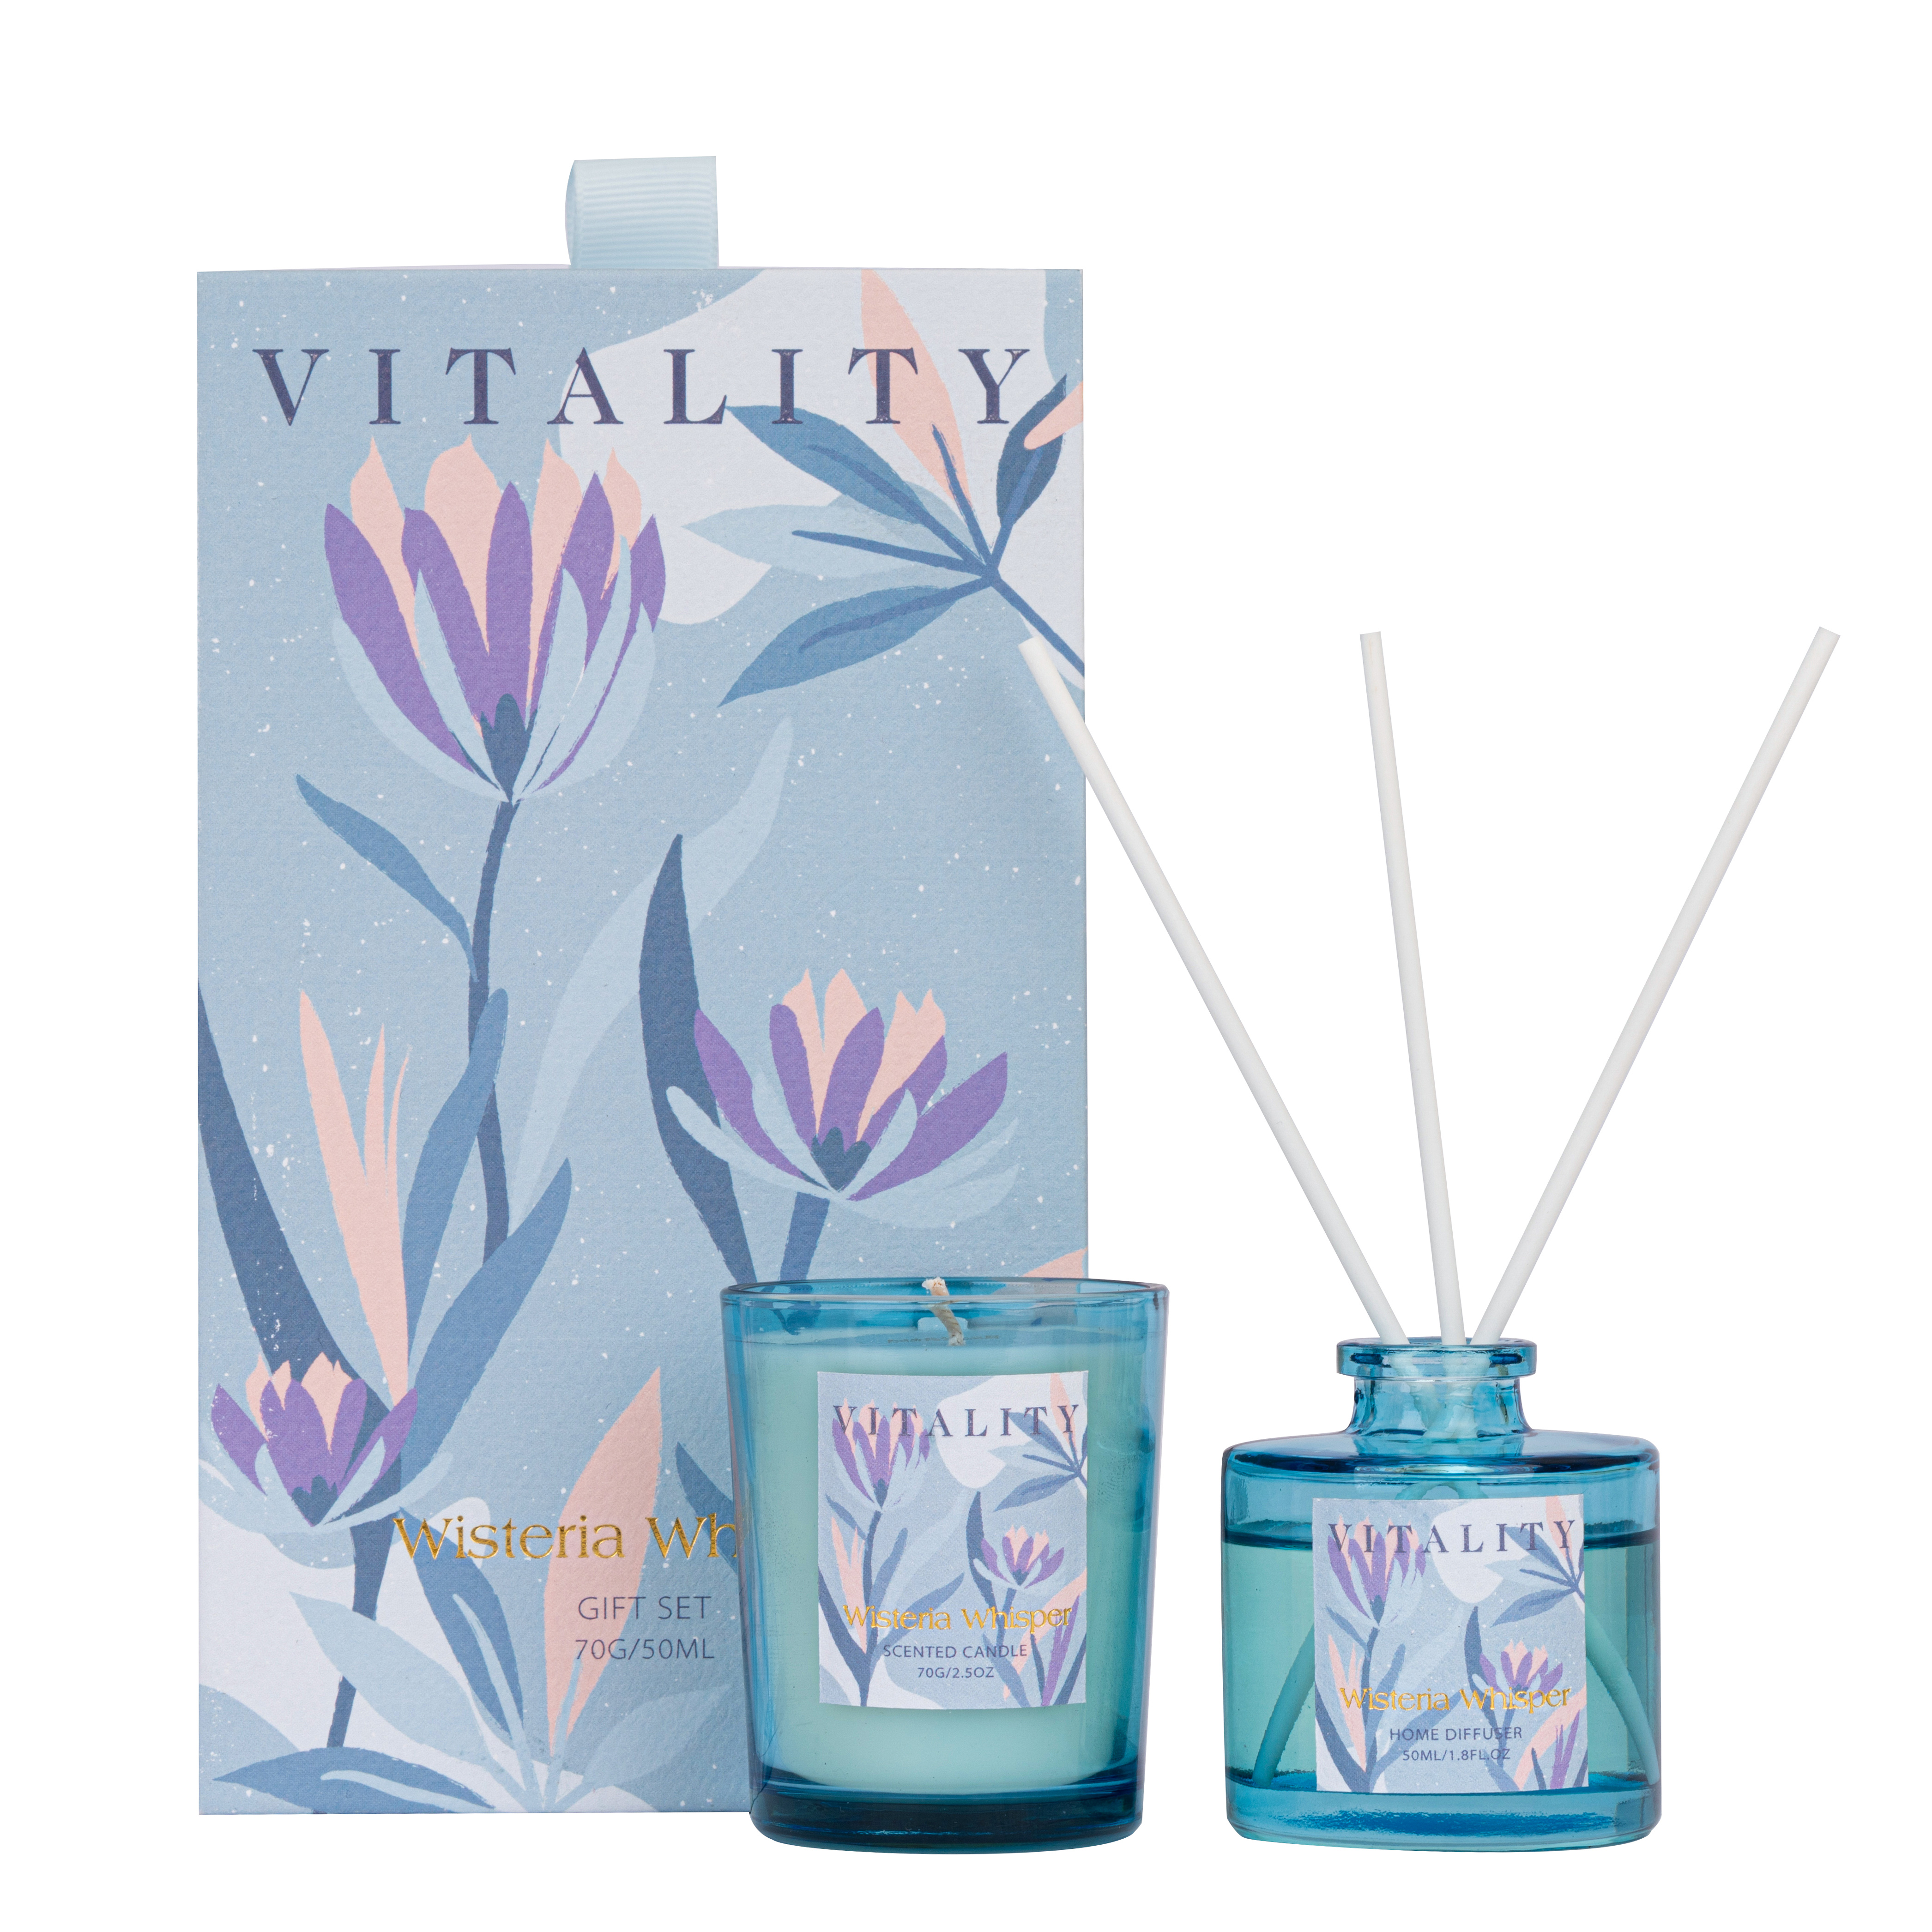 KINT&WOVE Collection Wisteria Whisper 70g/50ml Blue Scented Candle And Blue Reed Diffuser 